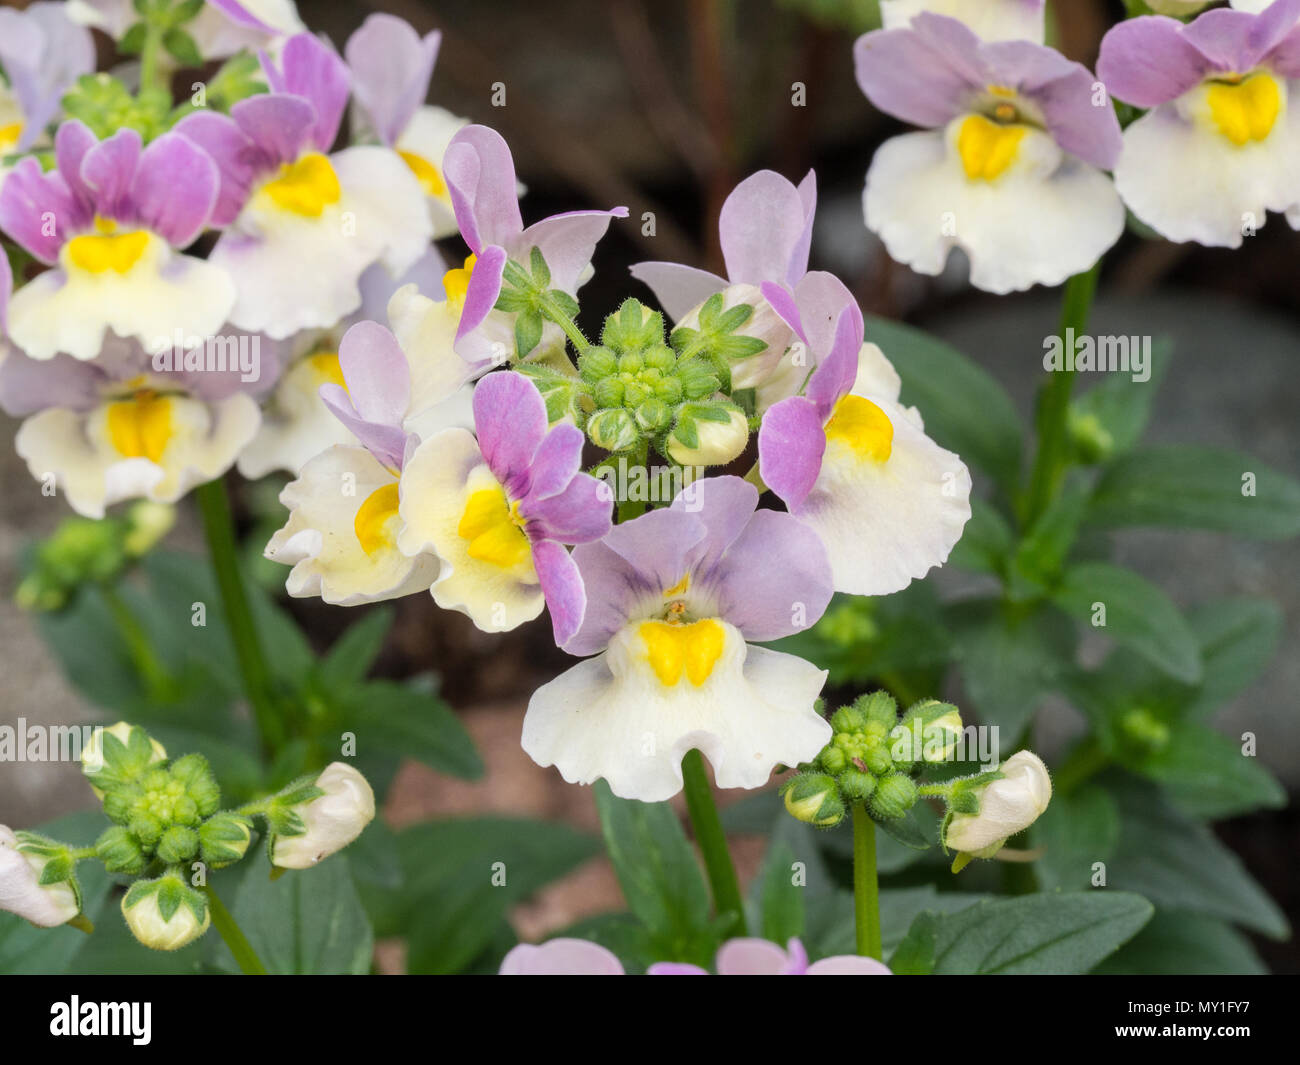 Close up of the flowers of Nemesia Bicolor Stock Photo